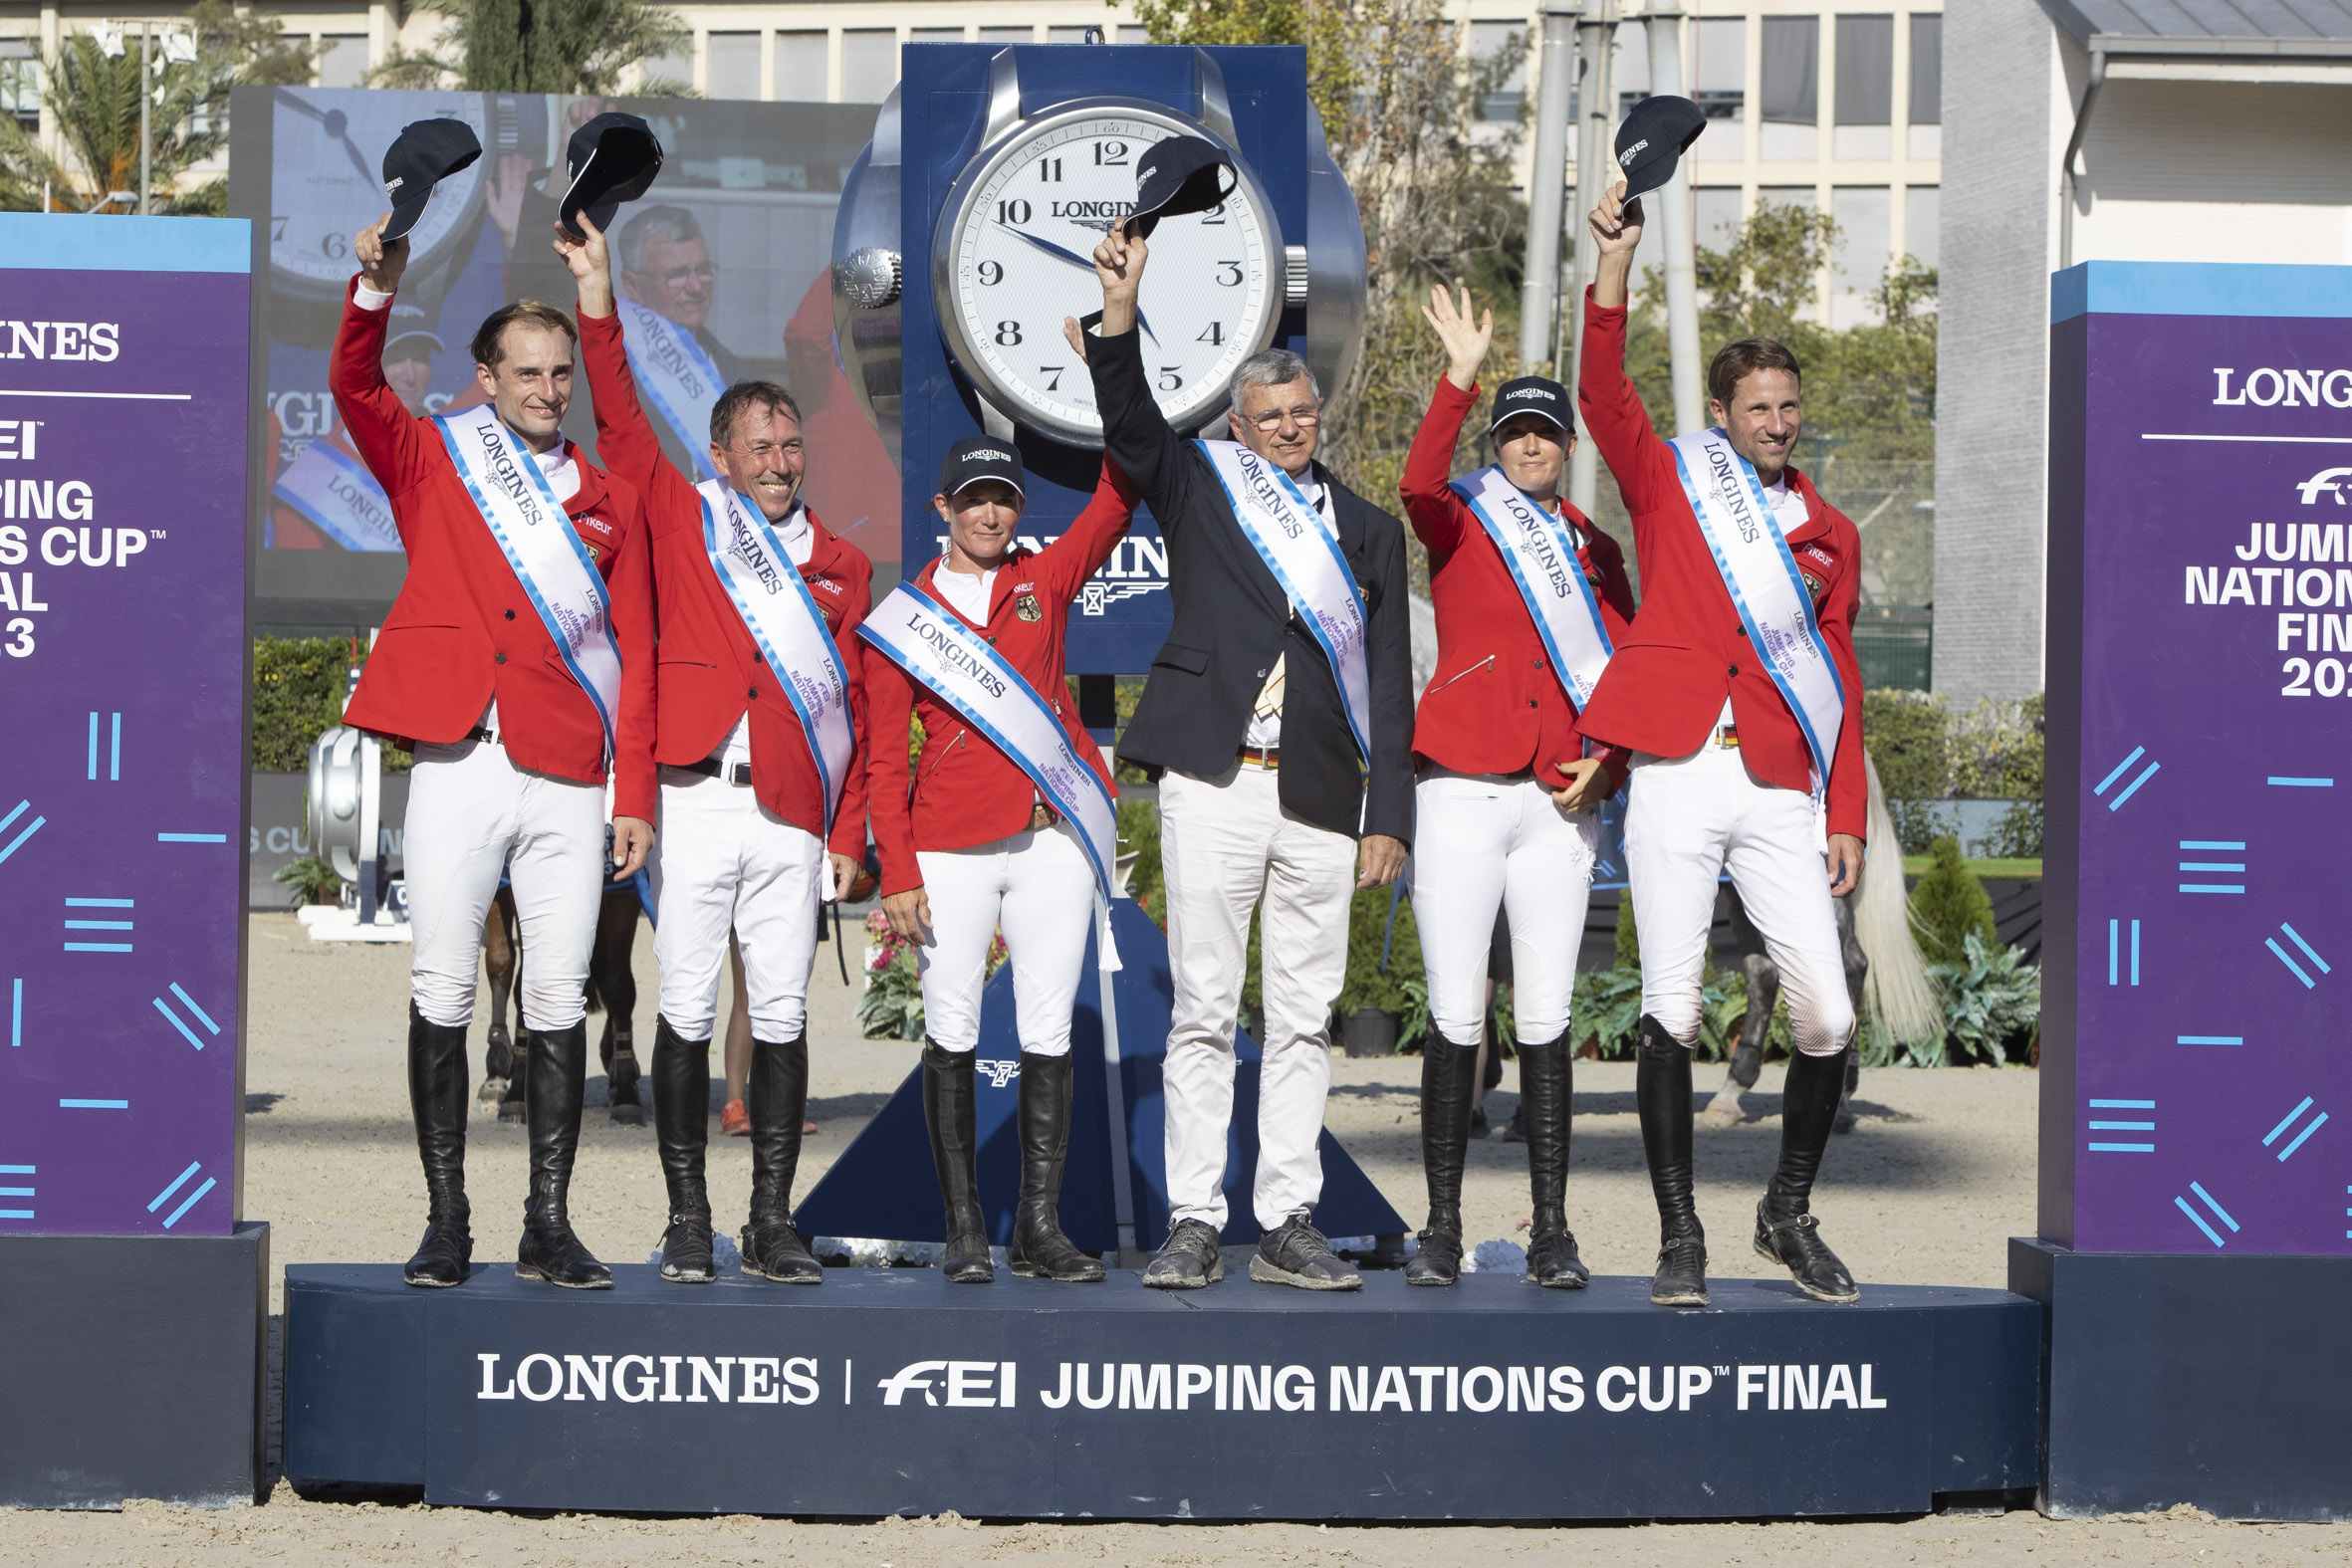 Germany wins the Longines Nations Cup